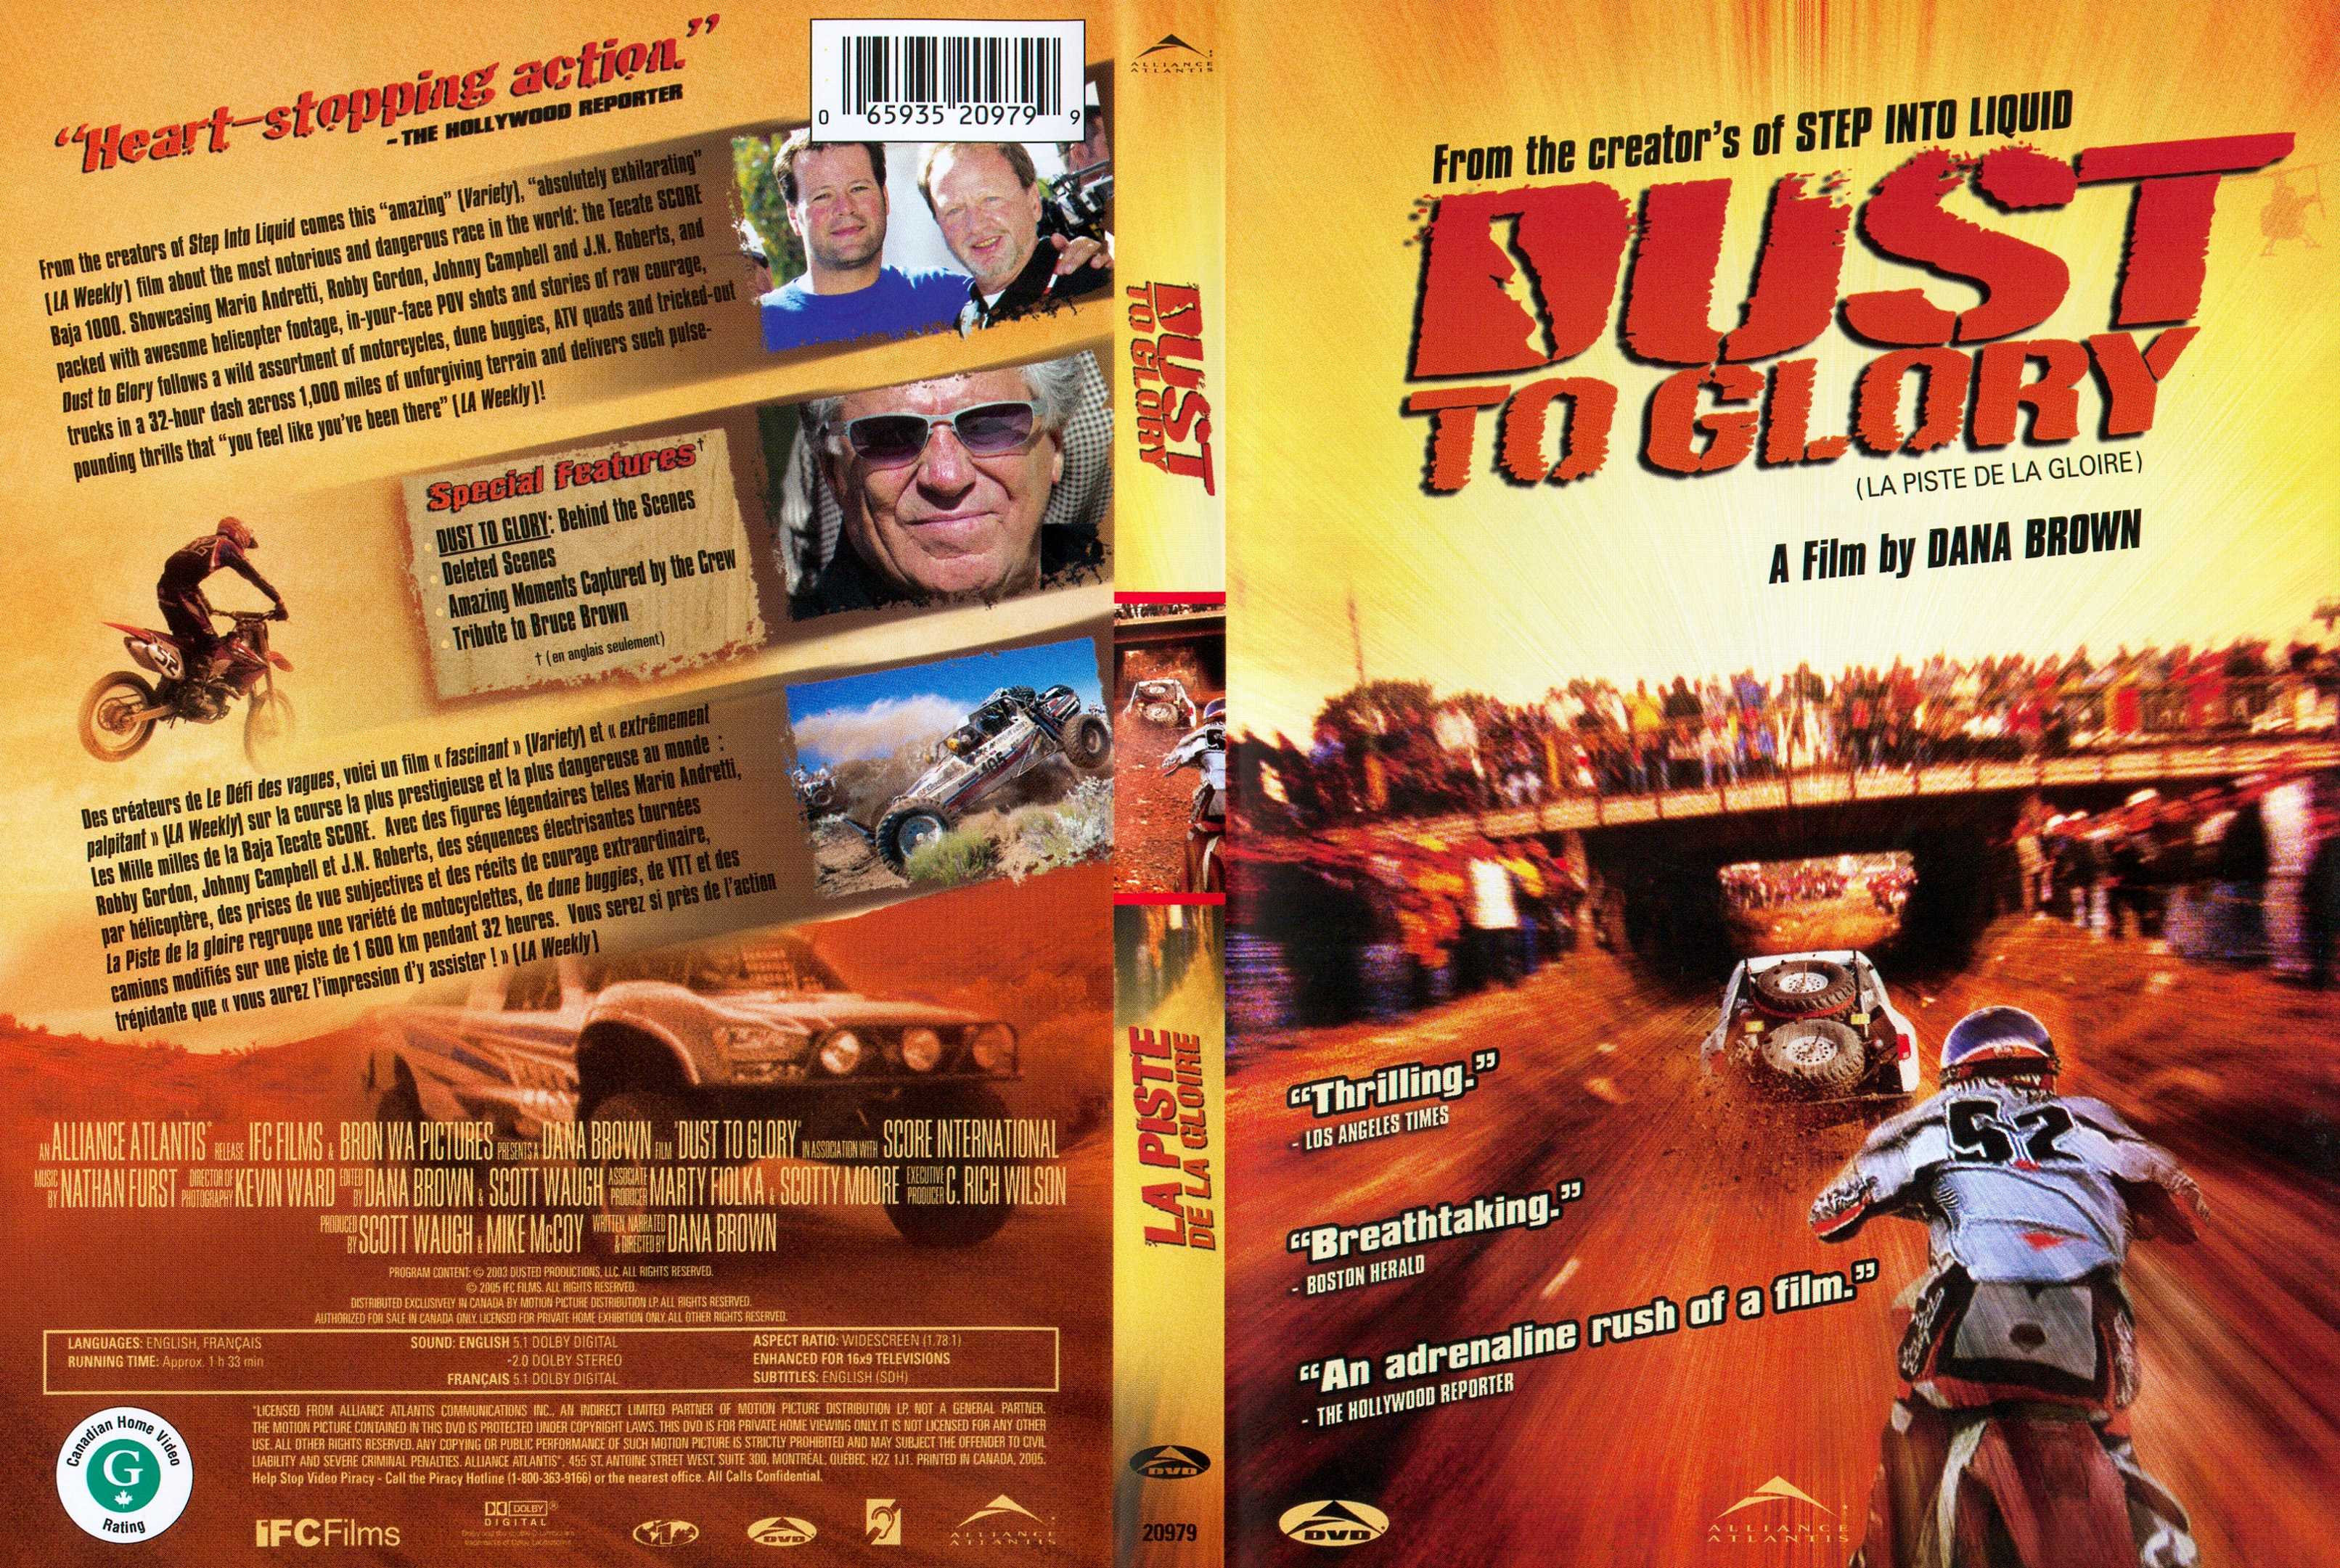 Jaquette DVD Dust to glory